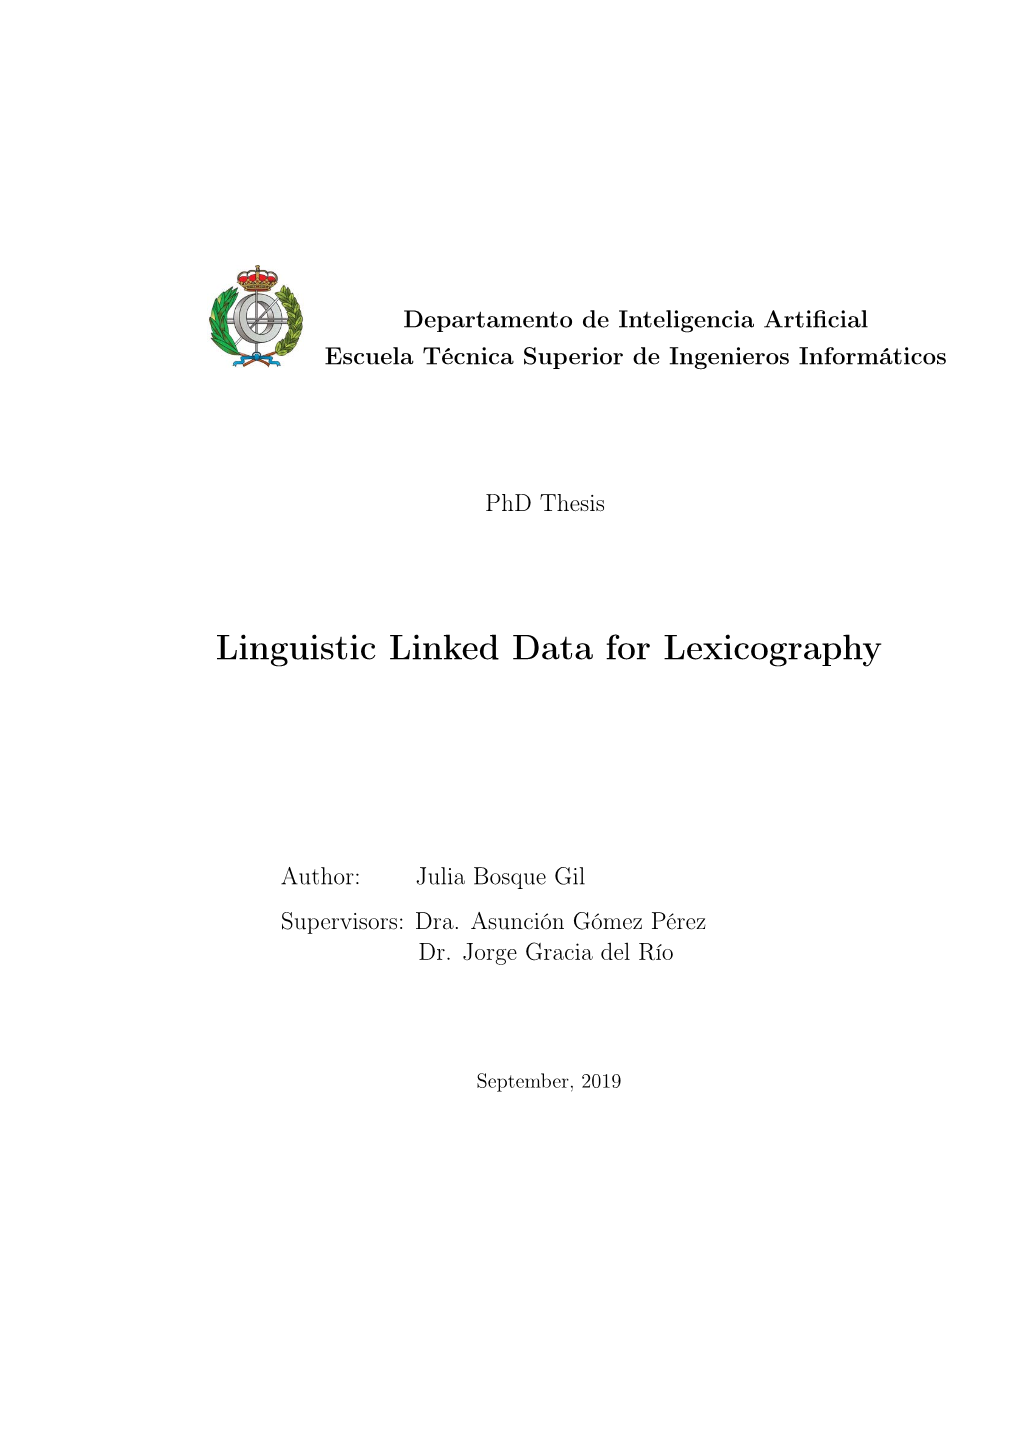 Linguistic Linked Data for Lexicography